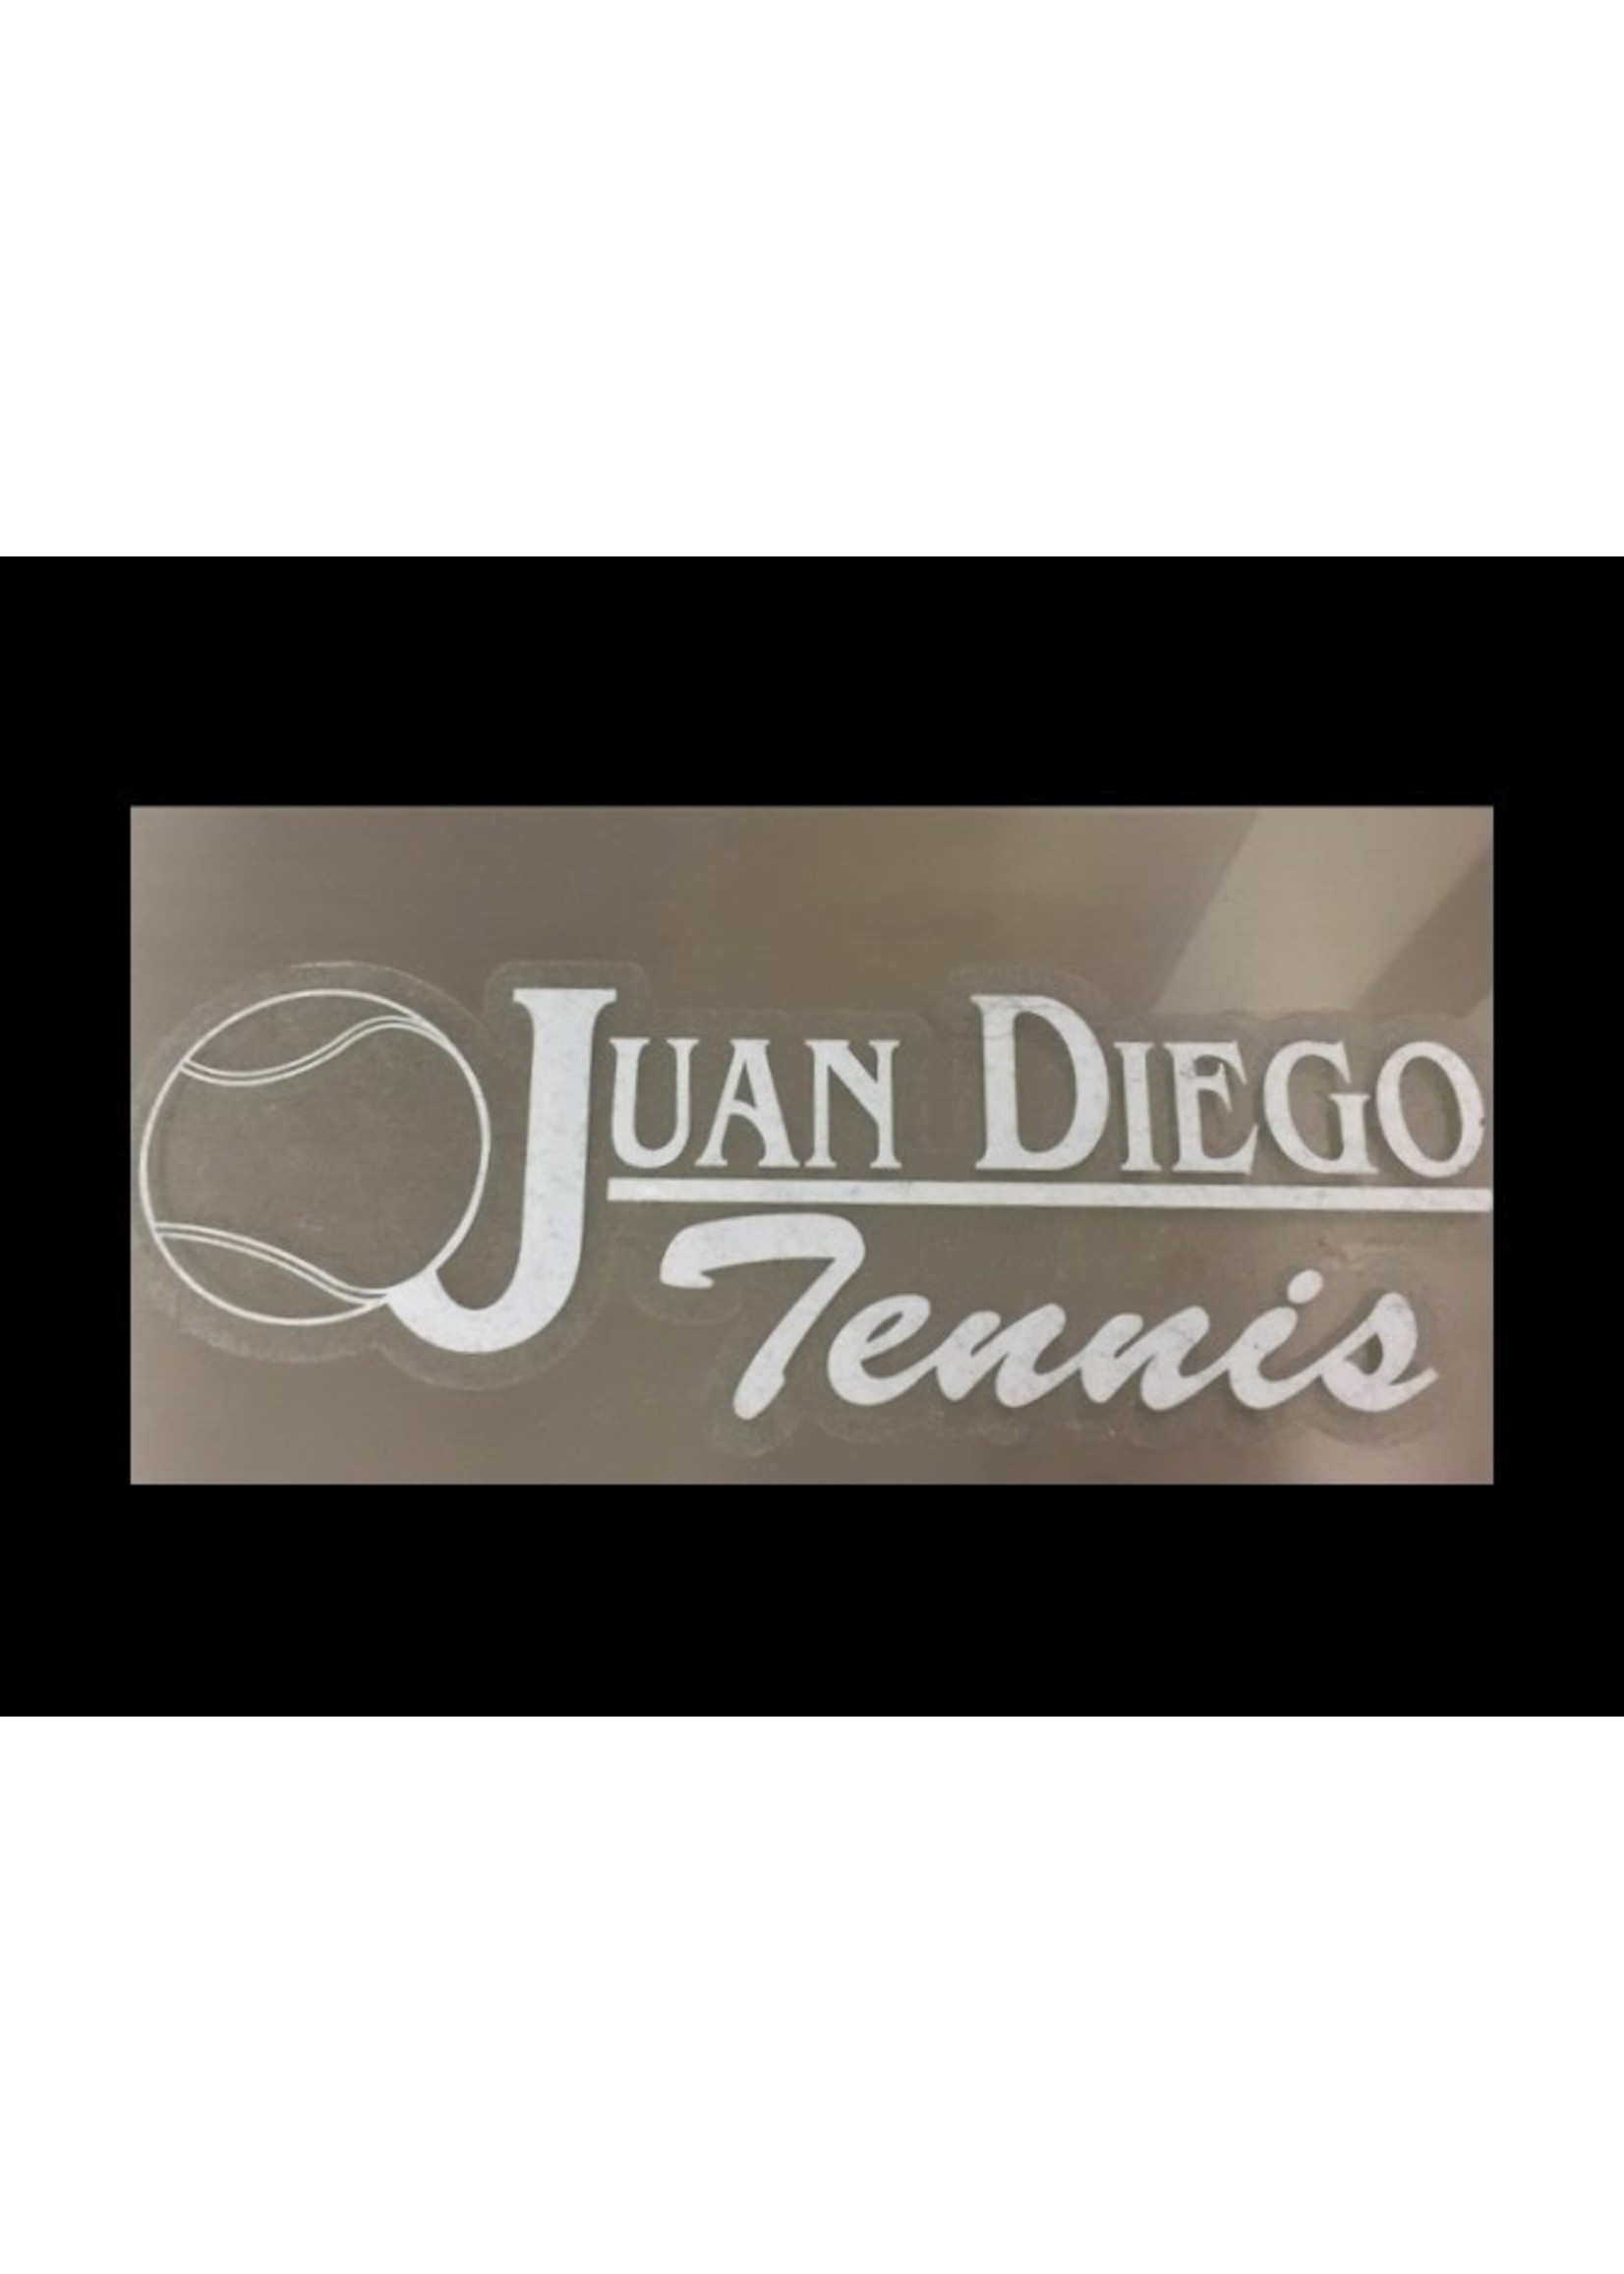 NON-UNIFORM Tennis - Decal, clearance, sold as is